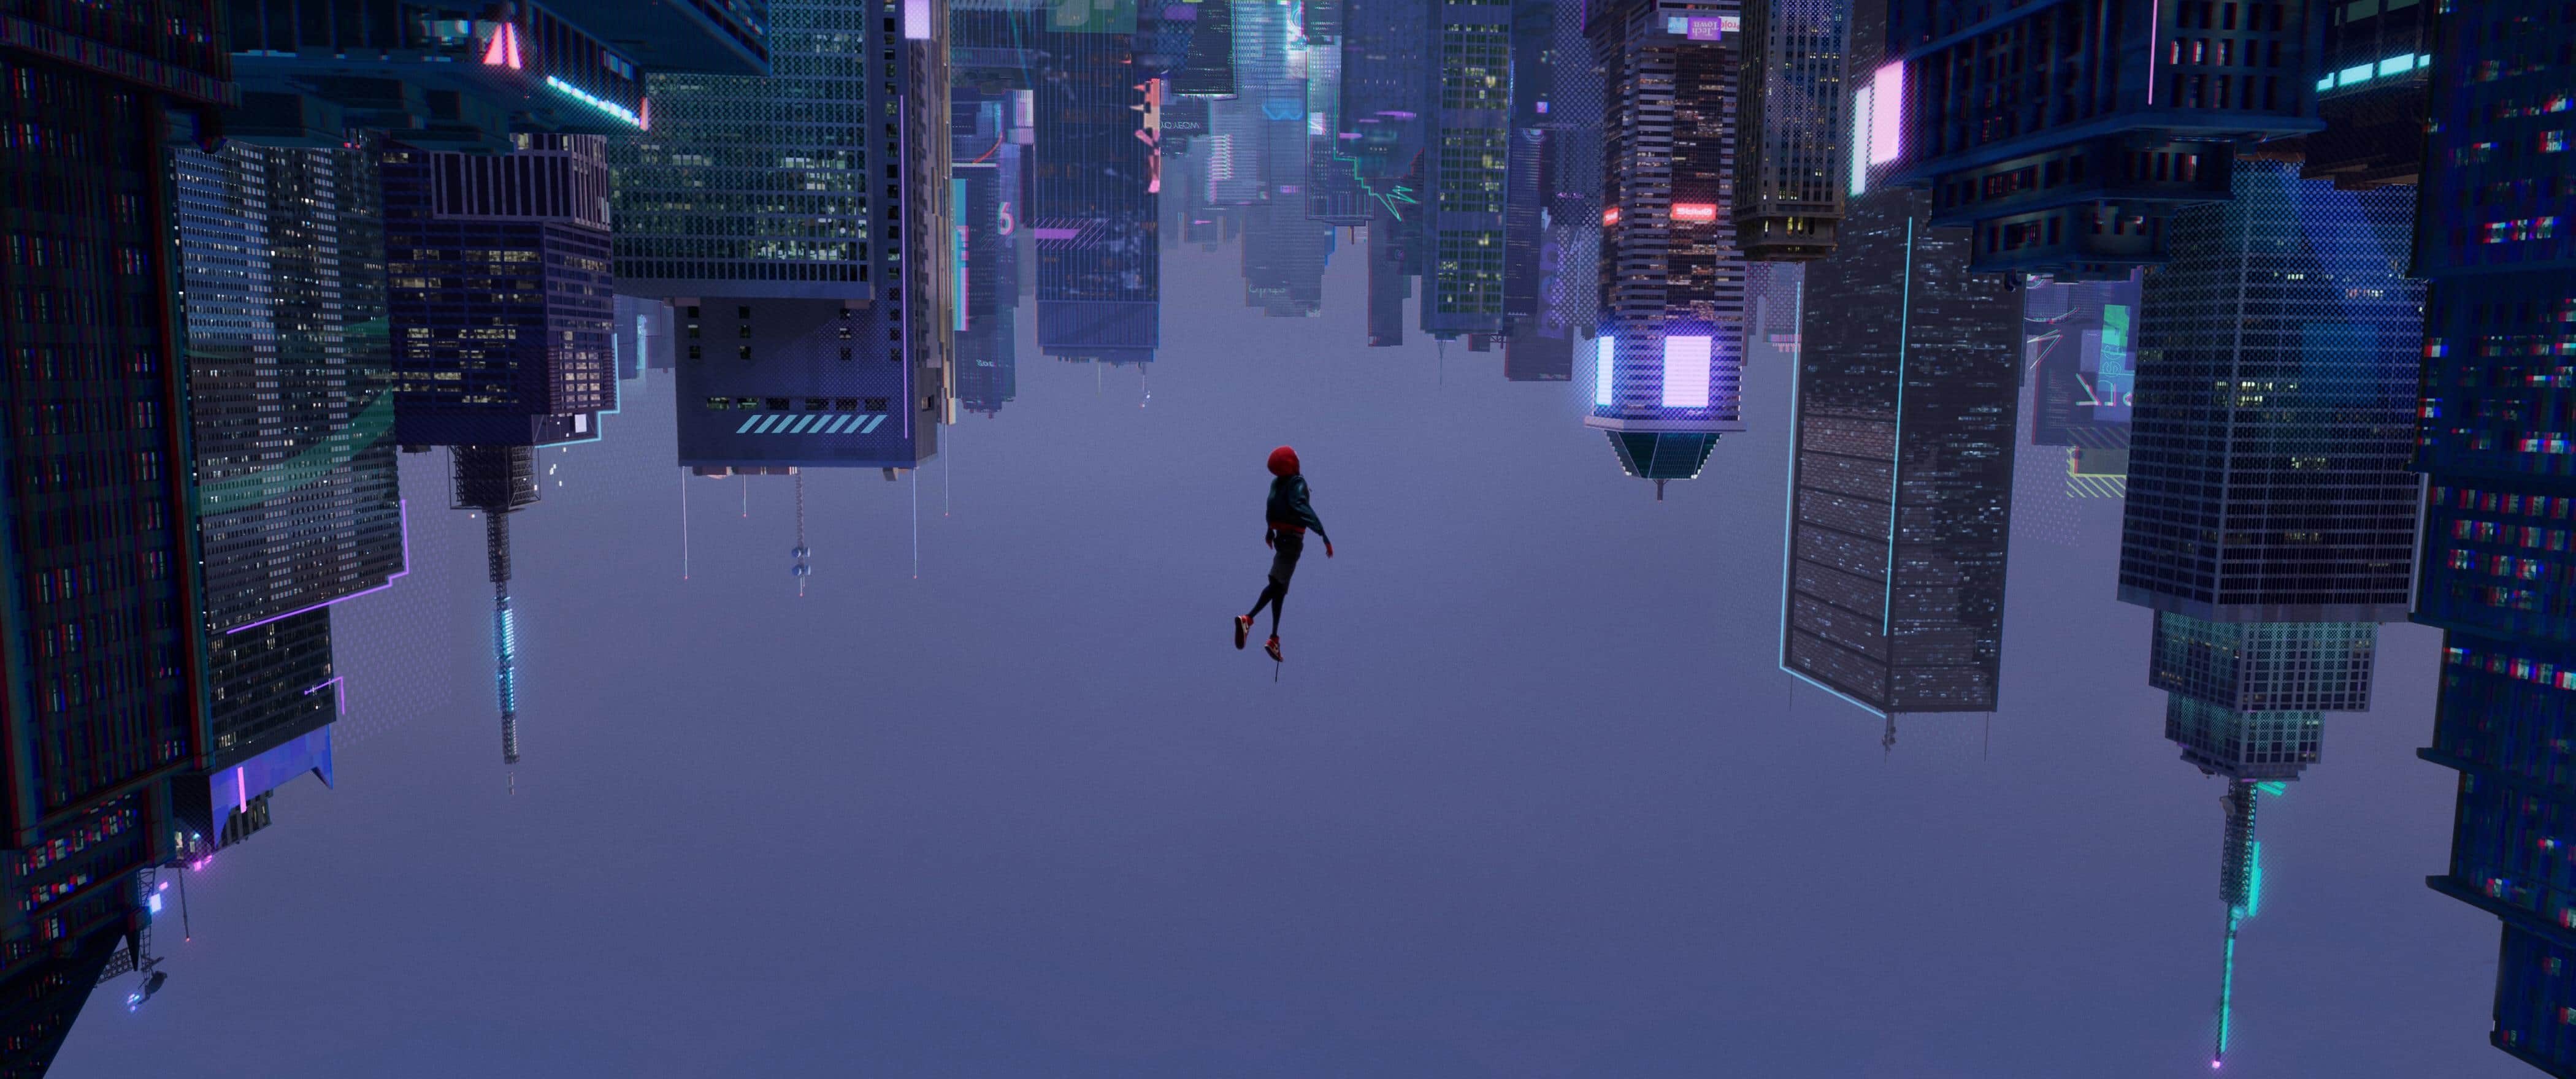 Spider-Man: Into the Spider-Verse Movie Review